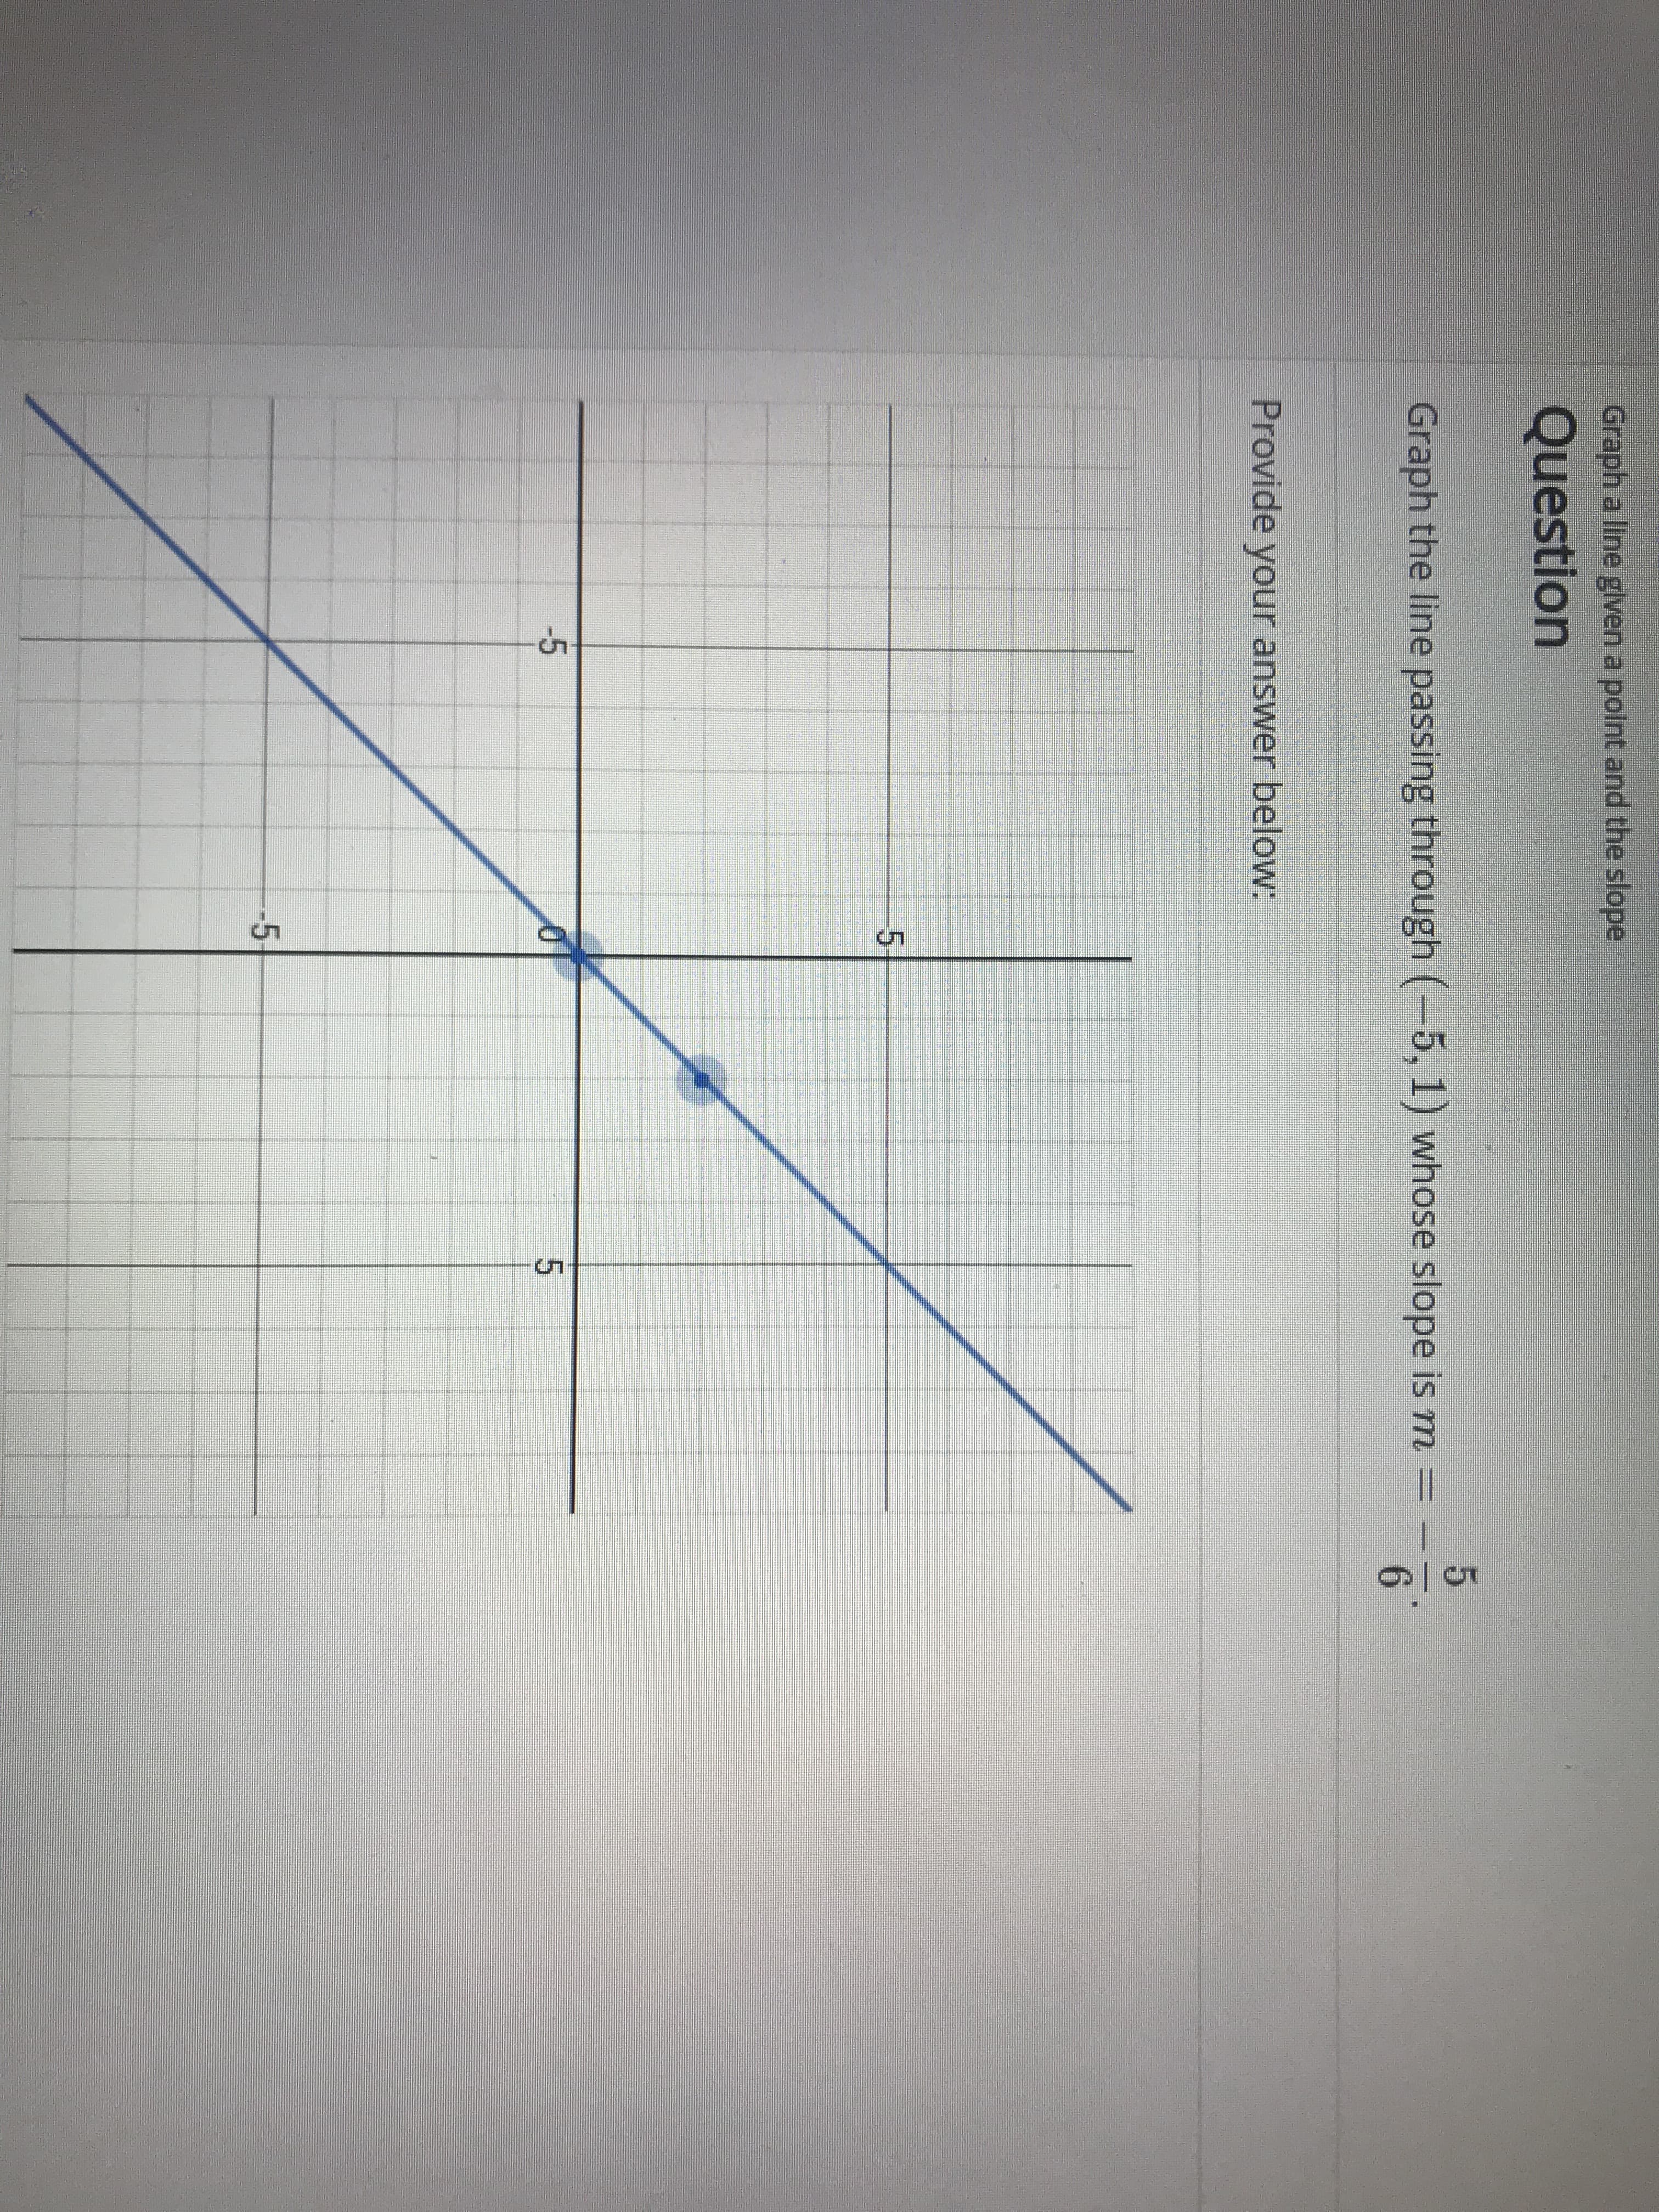 Graph a line glven a polnt and the slope
Question
Graph the line passing through (-5, 1) whose slope is m
6
Provide your answer below:
5
-5
5
5
